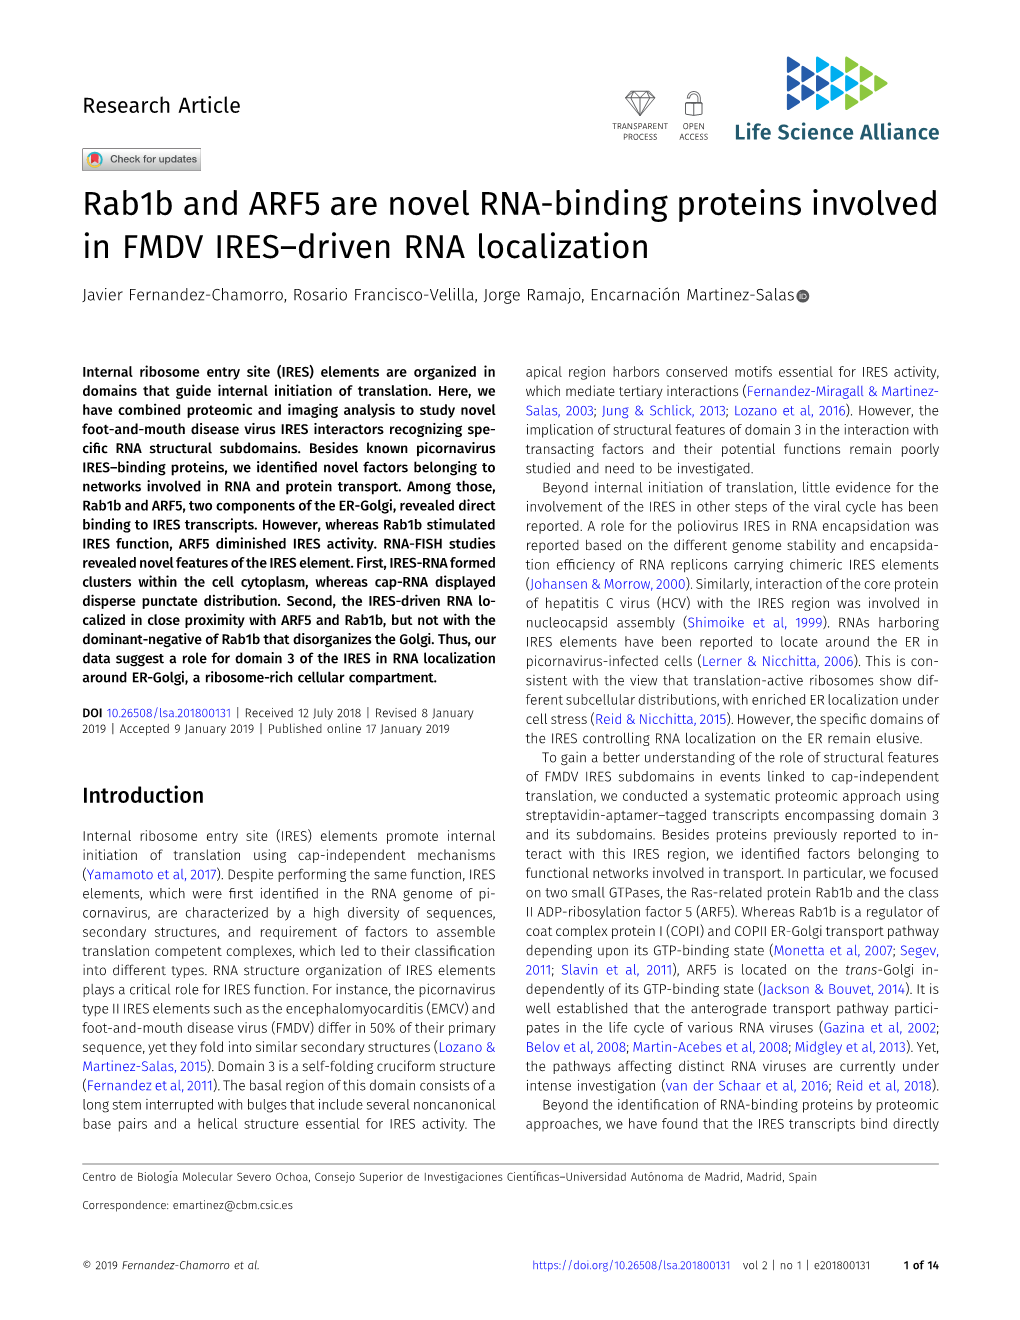 Rab1b and ARF5 Are Novel RNA-Binding Proteins Involved in FMDV IRES–Driven RNA Localization